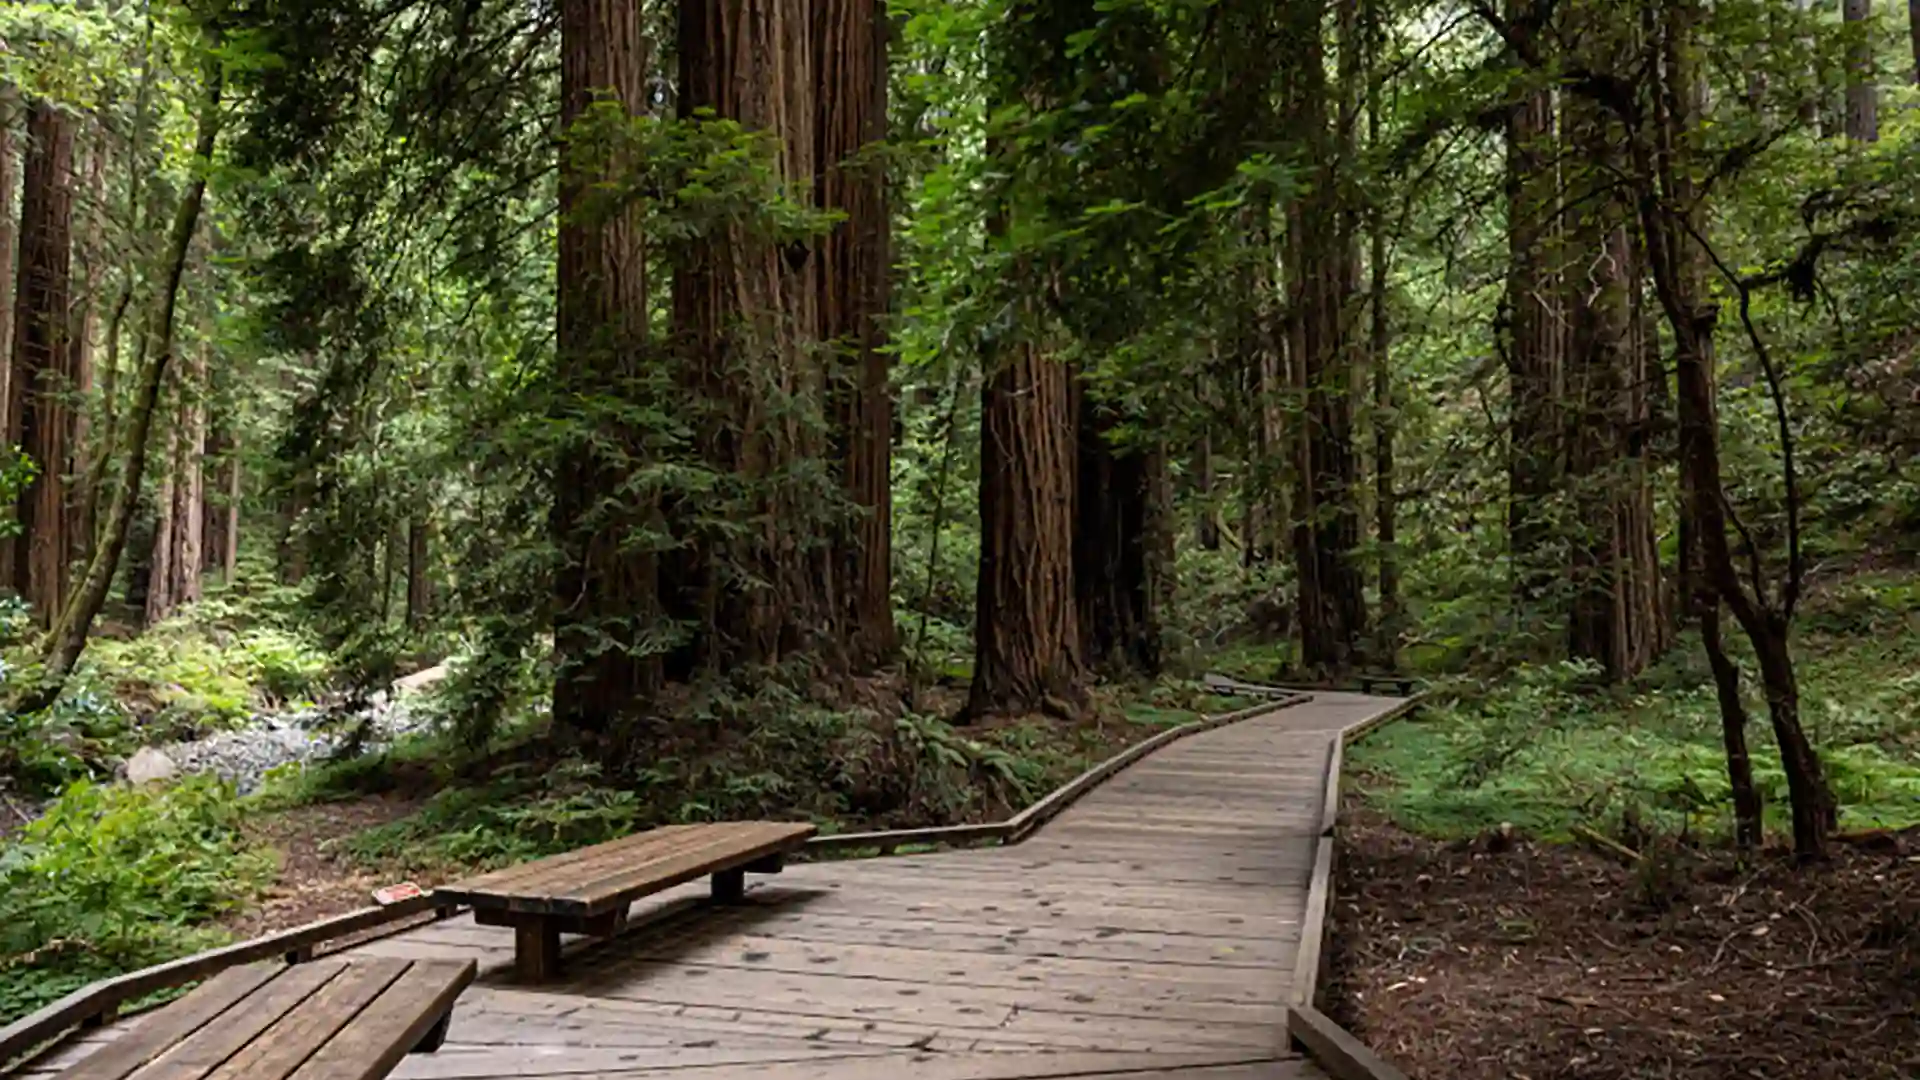 View of towering redwood trees along hiking trail in Redwoods National Park in California.